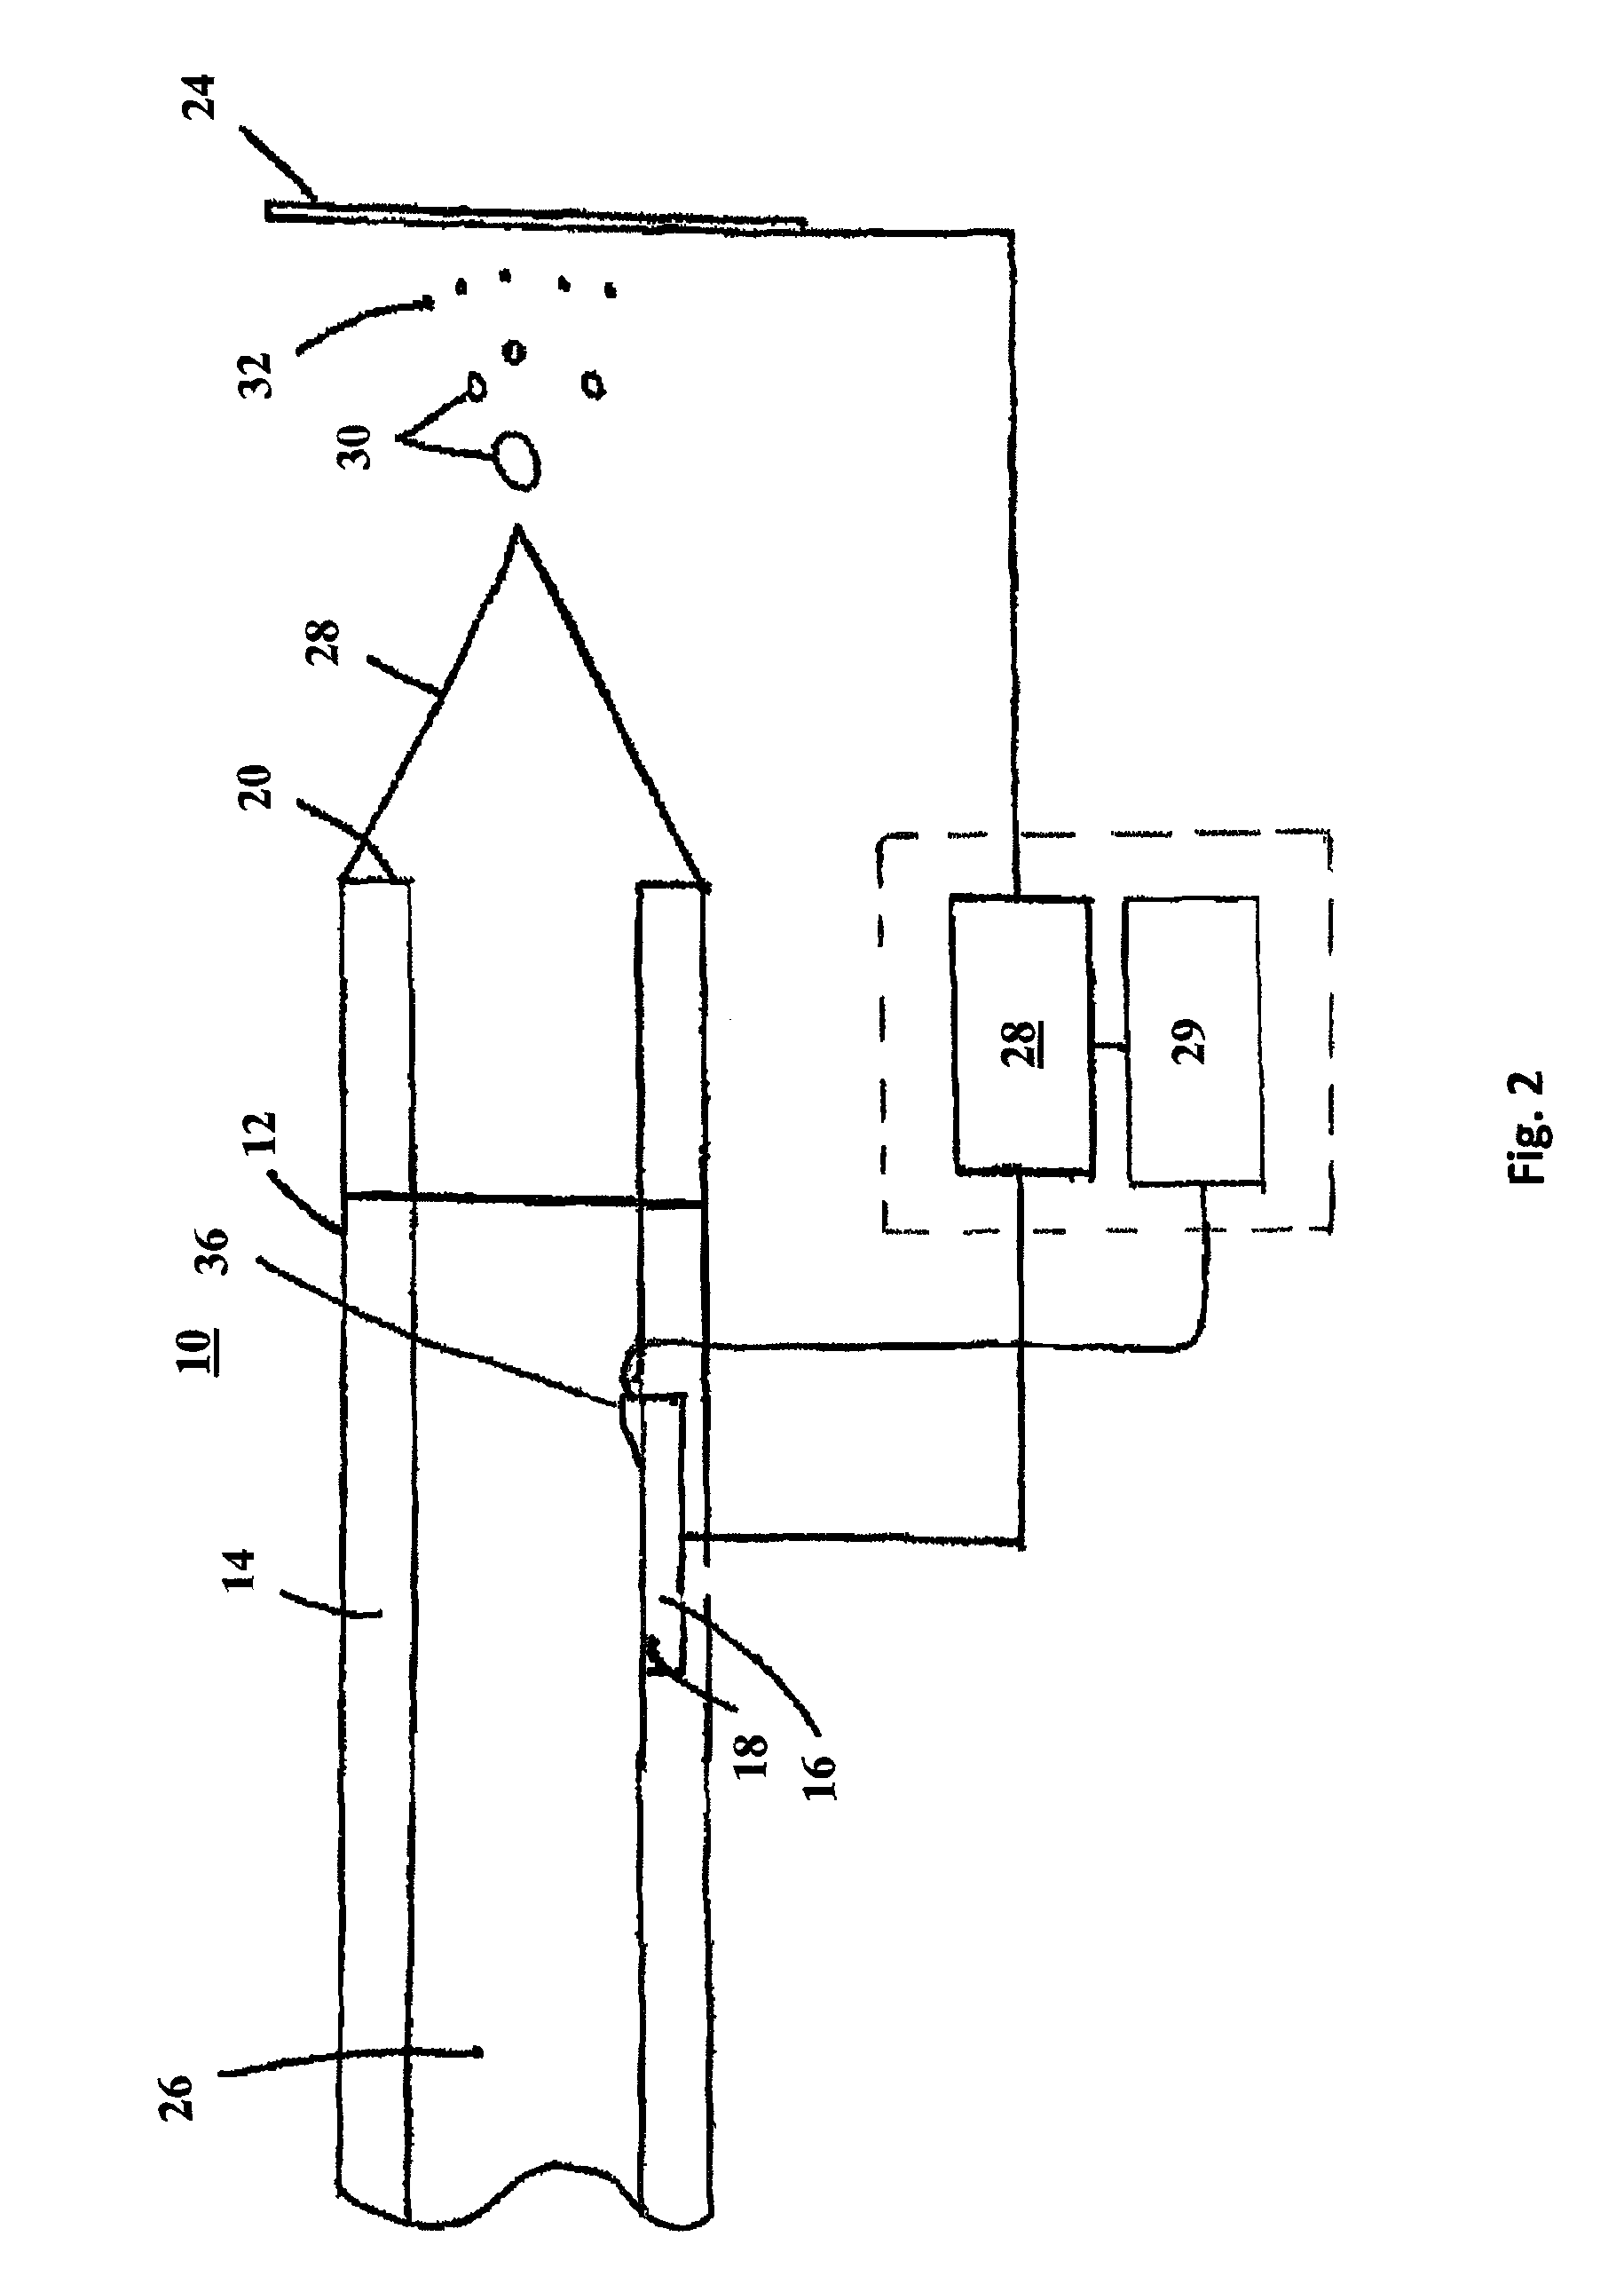 Pulsed voltage electrospray ion source and method for preventing analyte electrolysis